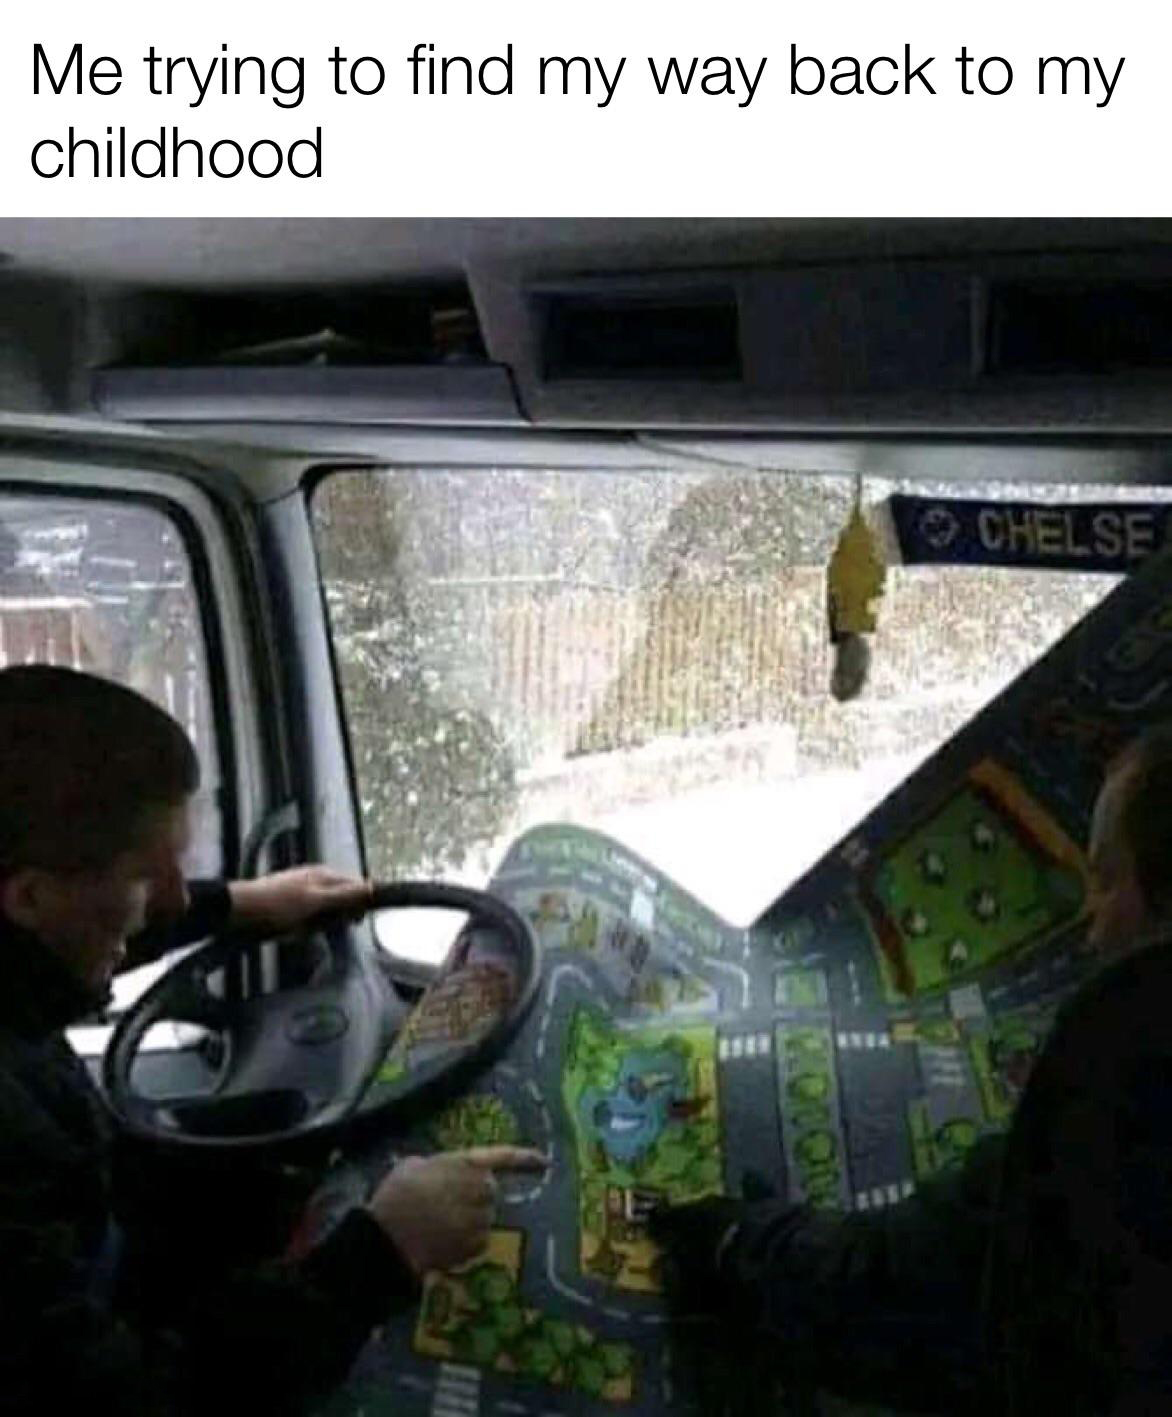 windshield - Me trying to find my way back to my childhood L The Chelse